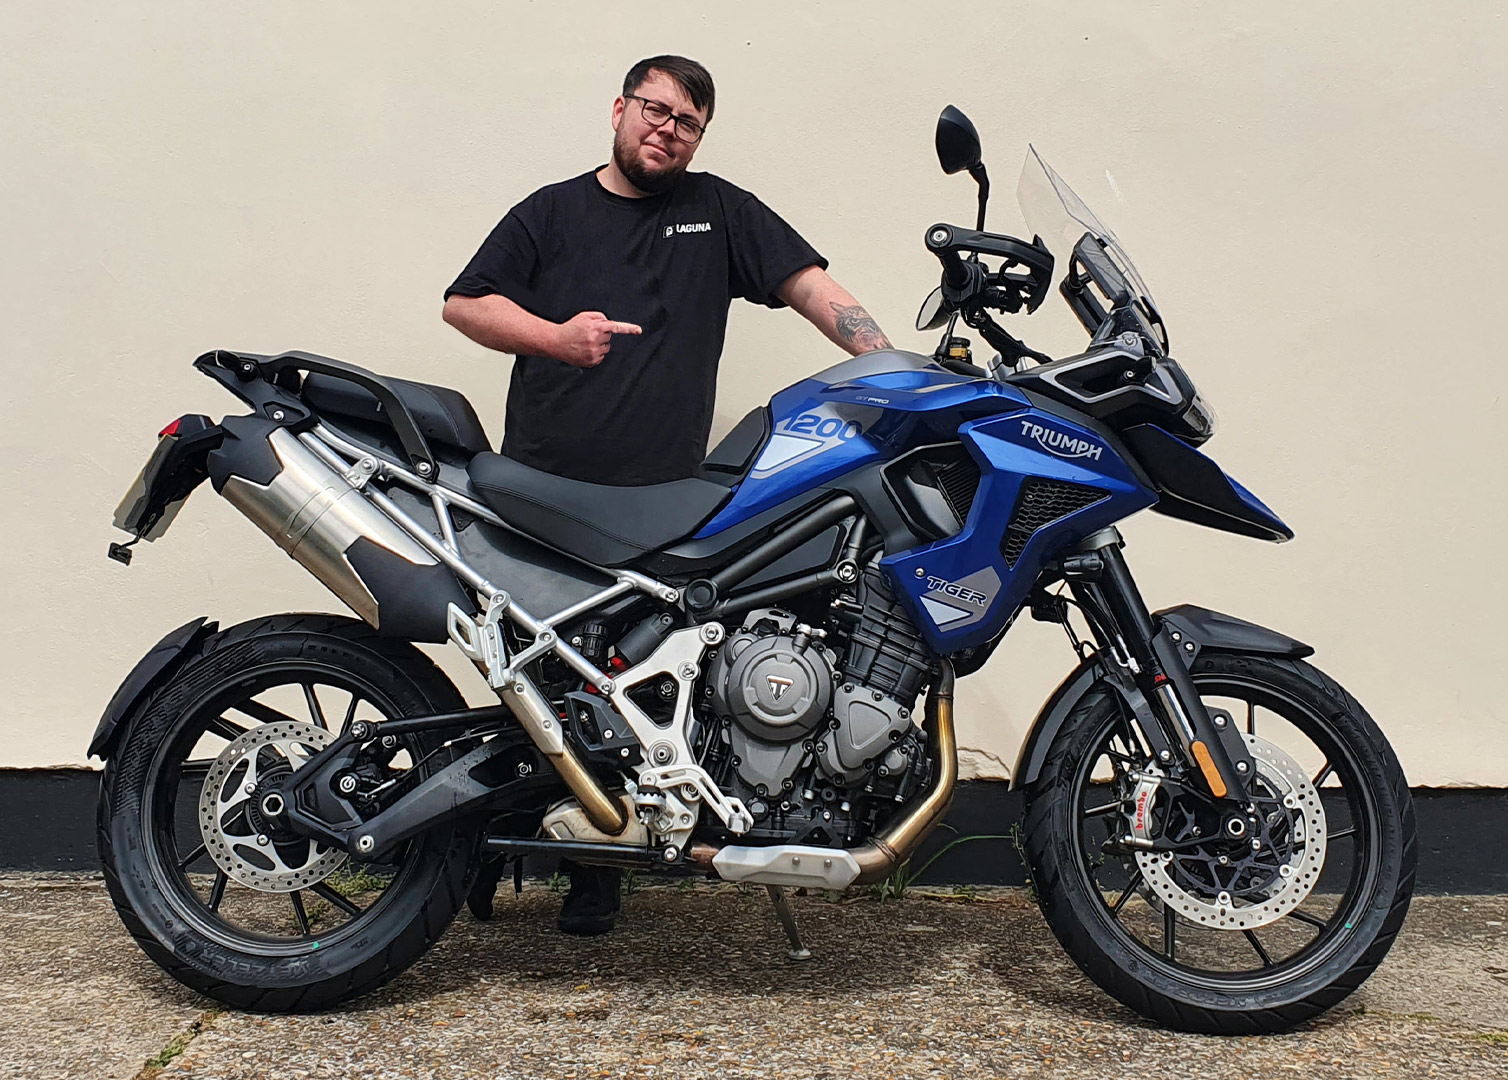 The Tiger 1200 GT Pro Review with Ryan - Overall Review